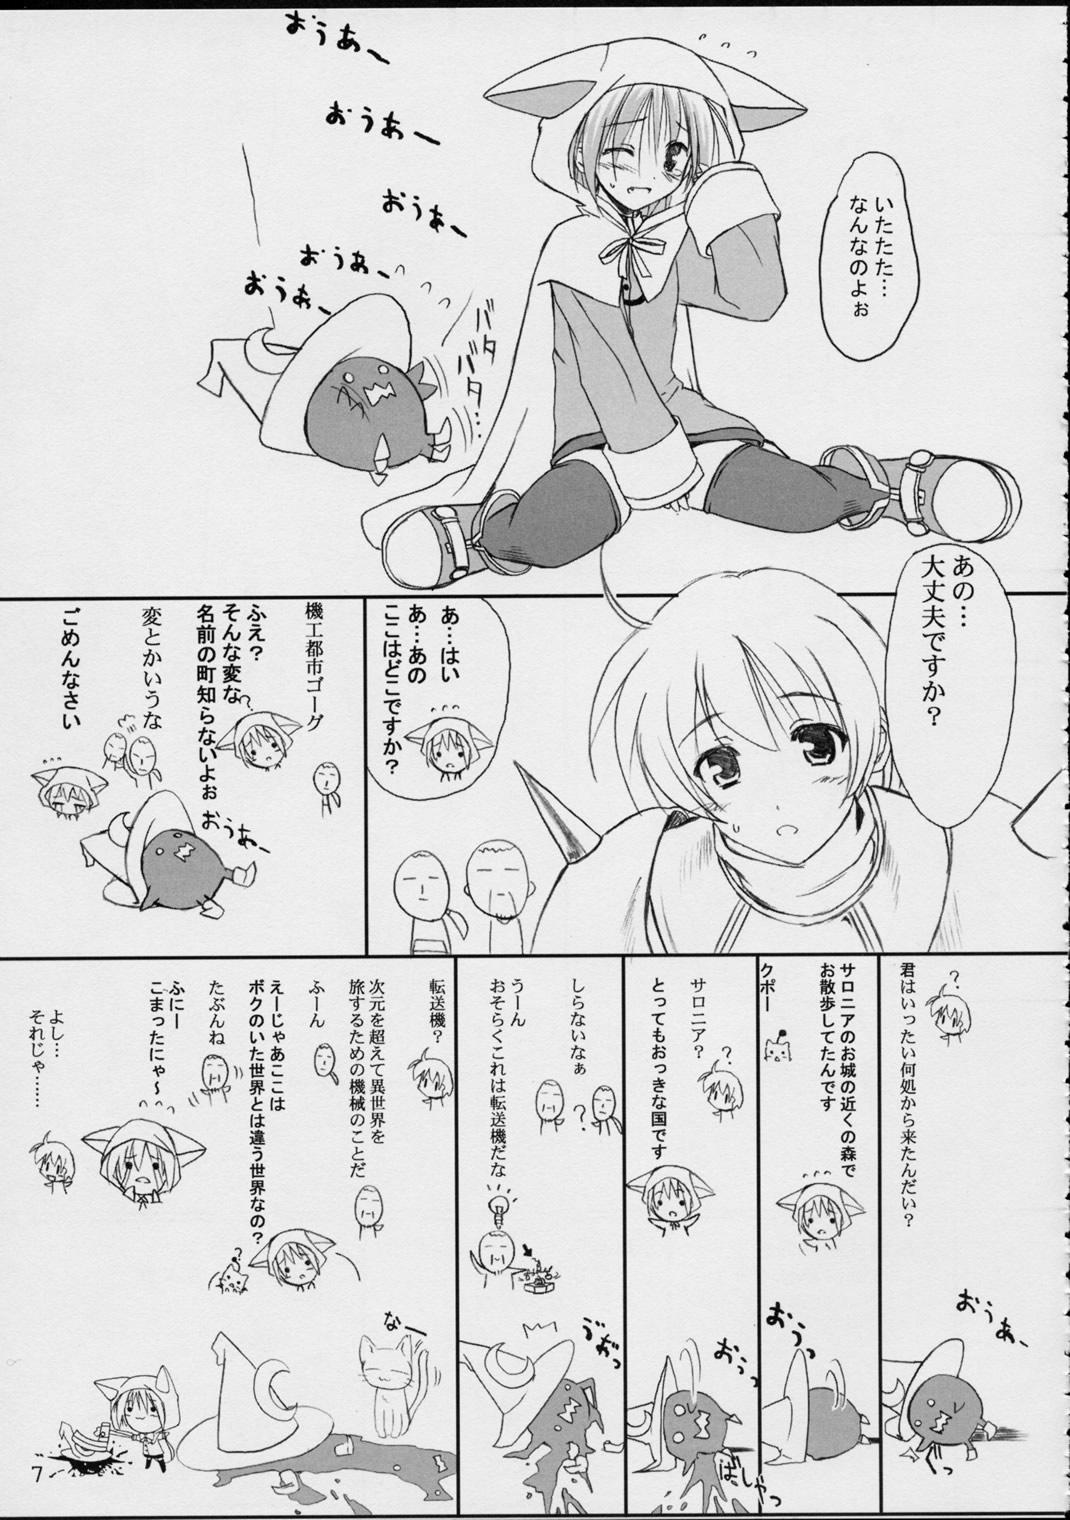 Romantic puipuipu- sanshiki - Final fantasy iii Pigtails - Page 7